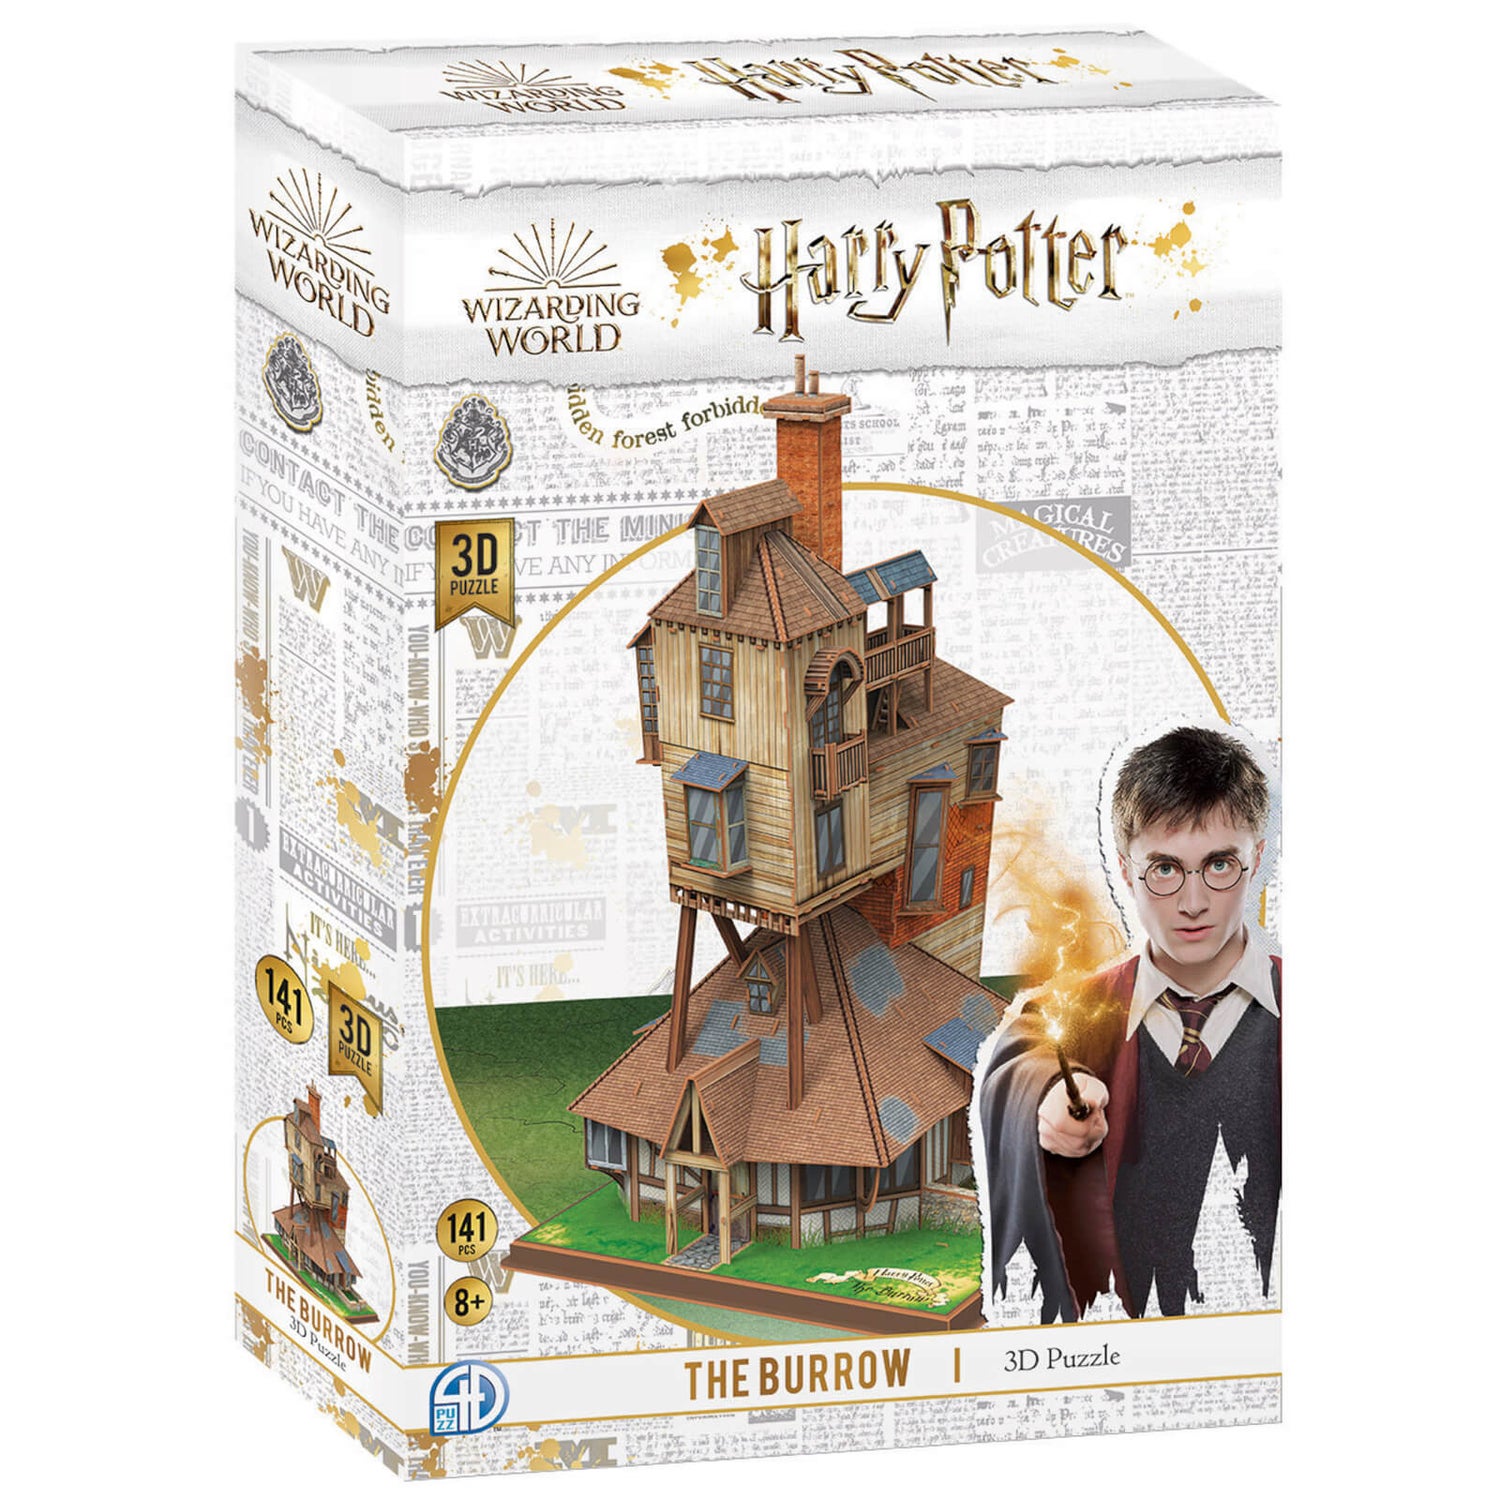 Harry Potter – The Burrow 3D Jigsaw Puzzle